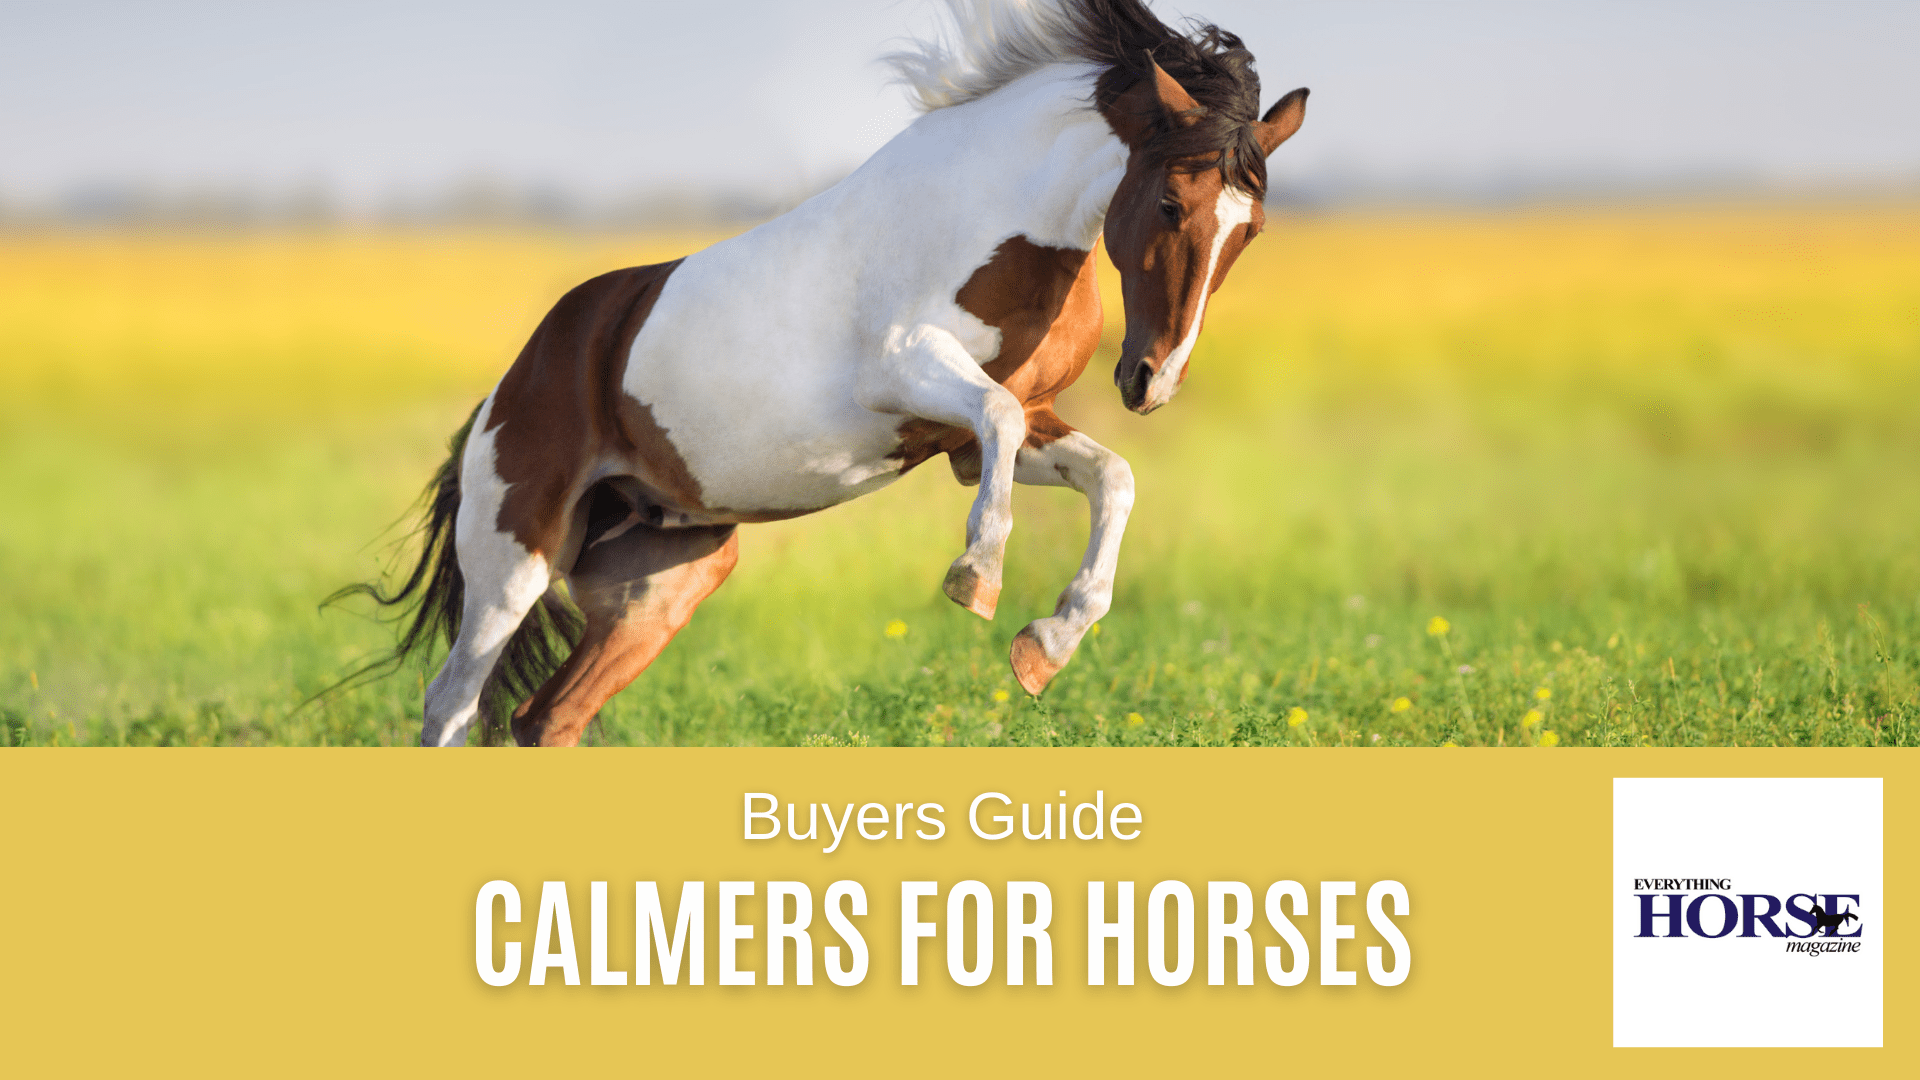 Image of horse playing in a field with heading 'calmers for horses'